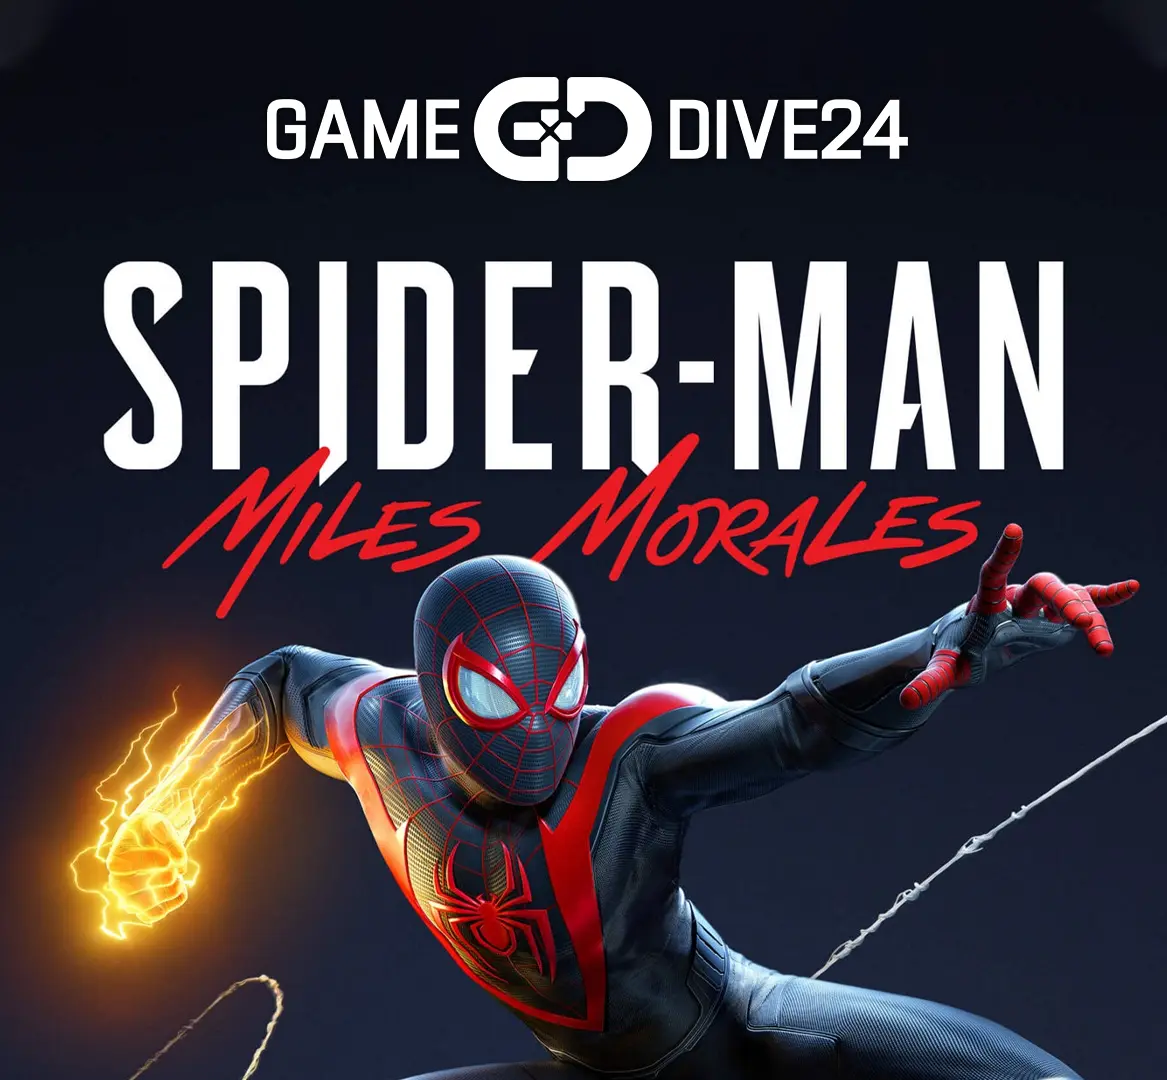 Spider-Man Miles Morales – New Chapter in the Adventures of Spidey